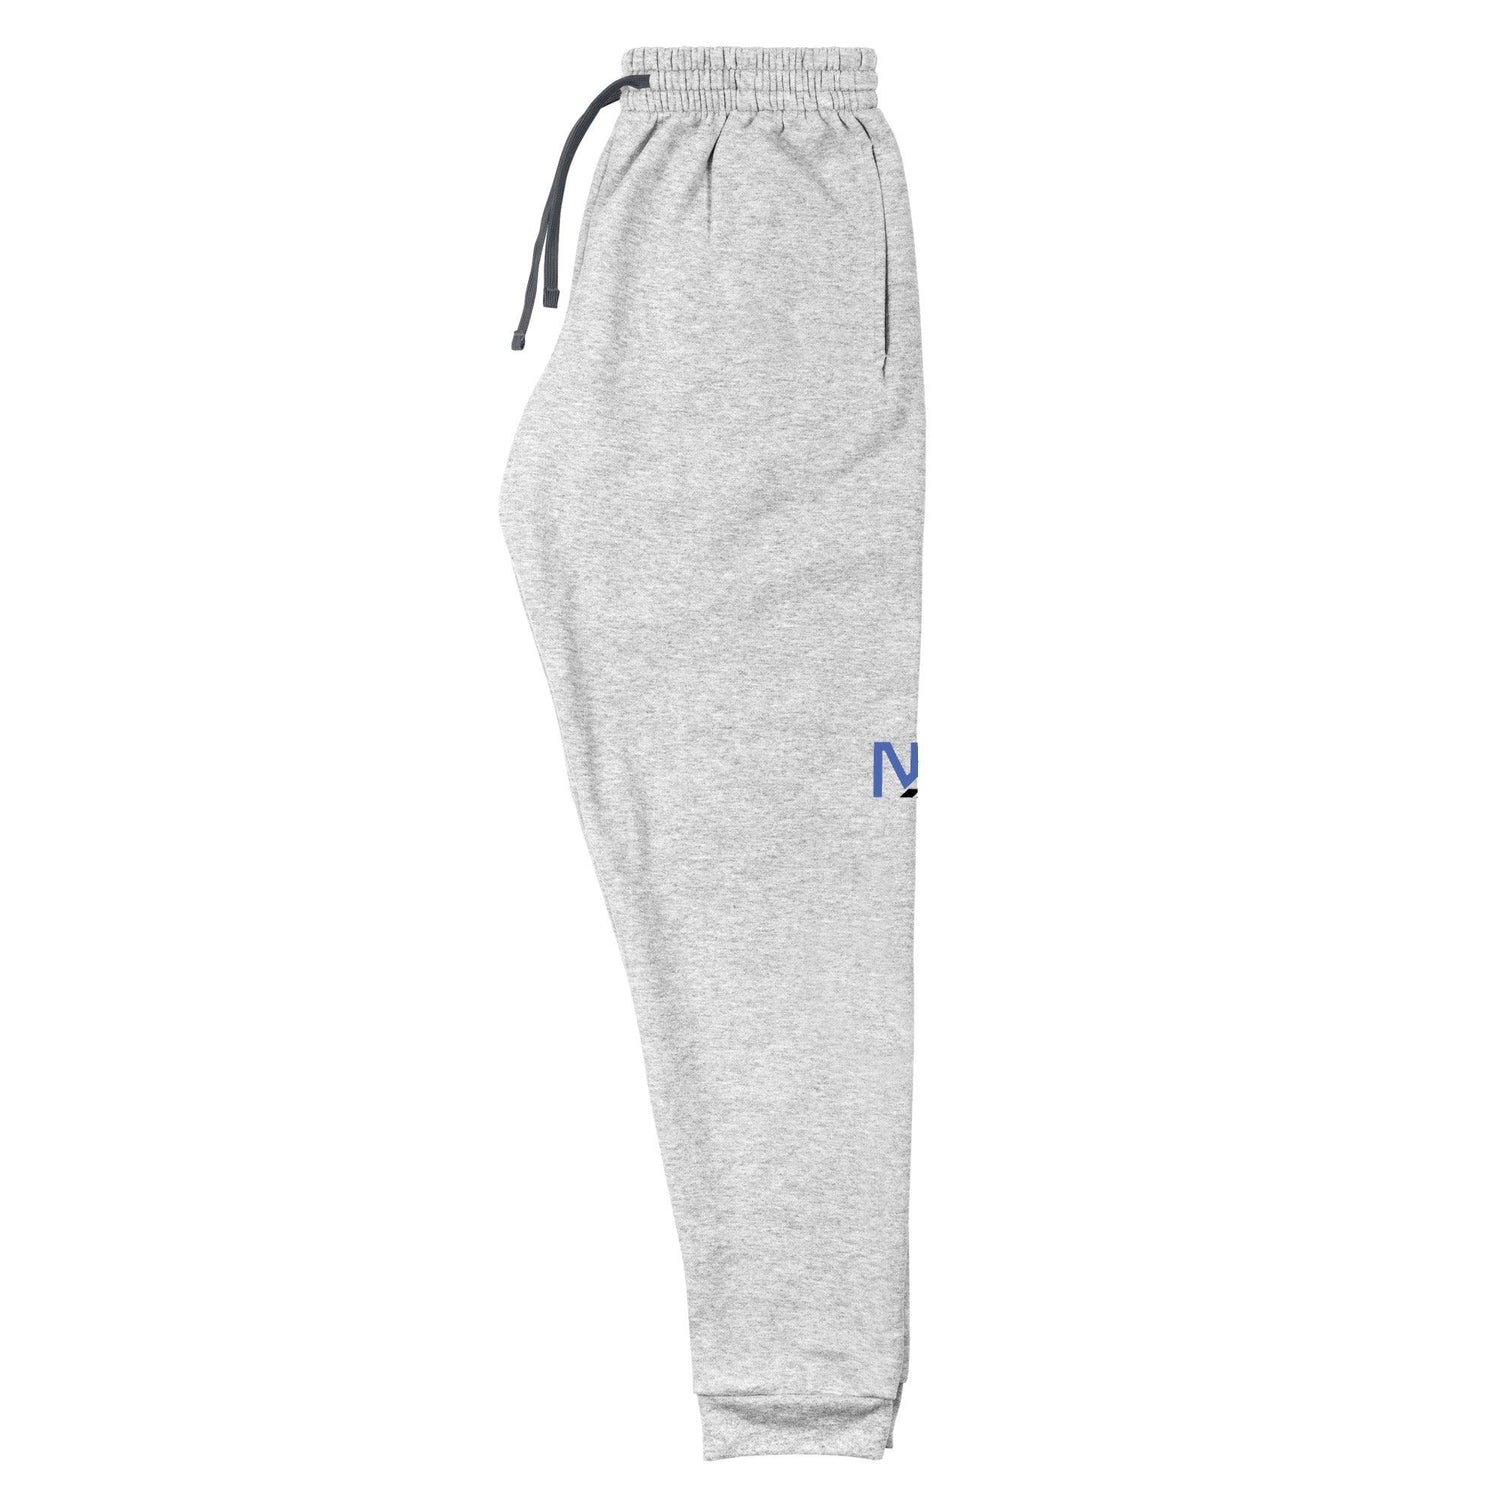 Nate Sestina "NS7" Joggers - Fan Arch